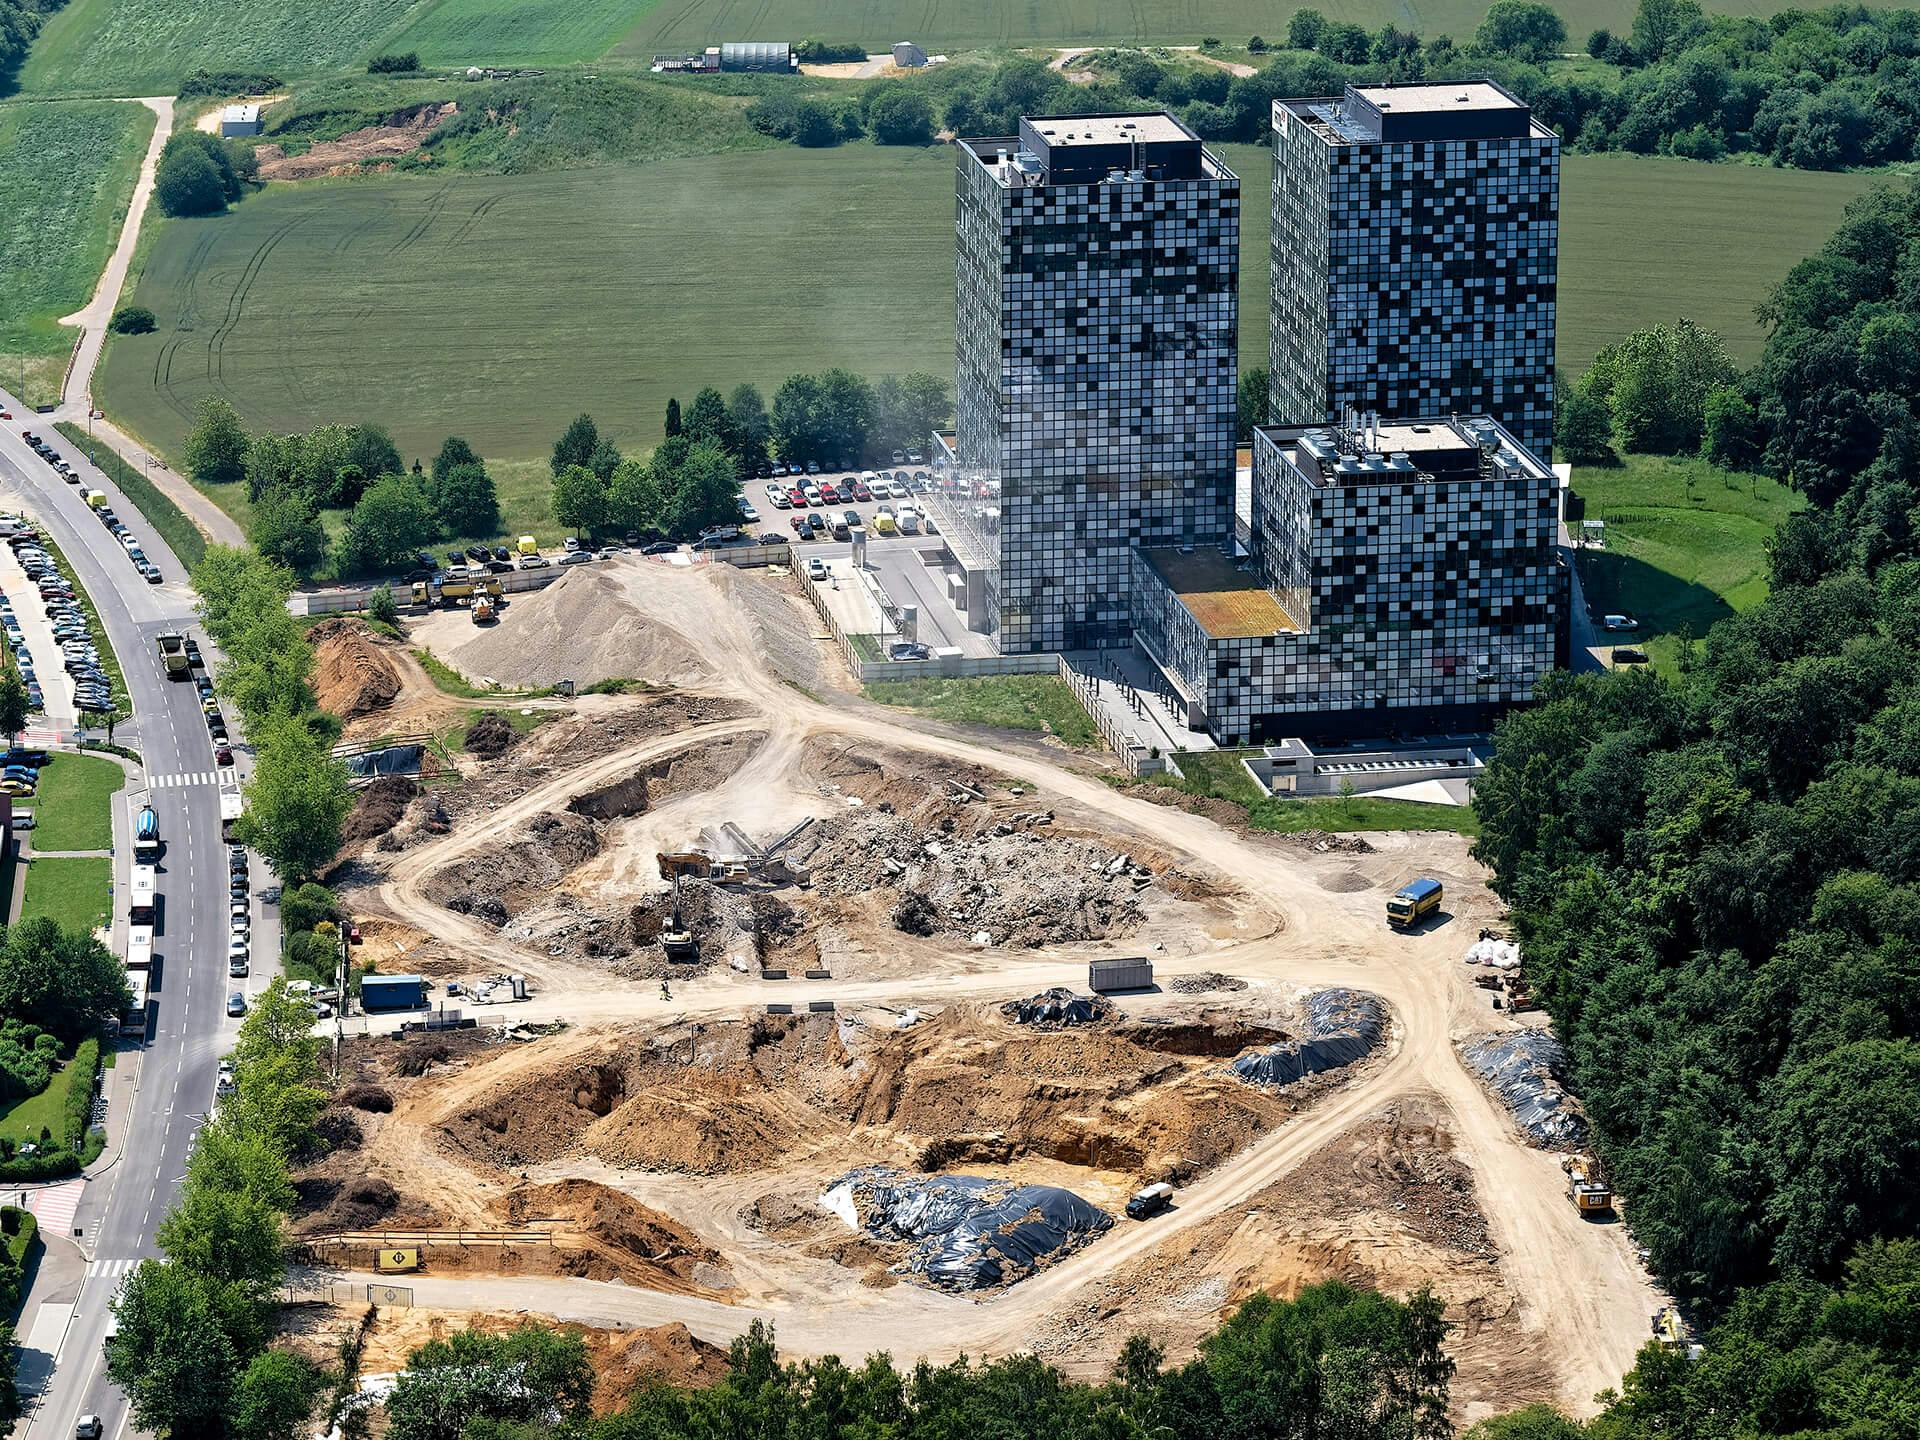 After the demolition of the old RTL building, the materials were crushed on site to be used in new construction